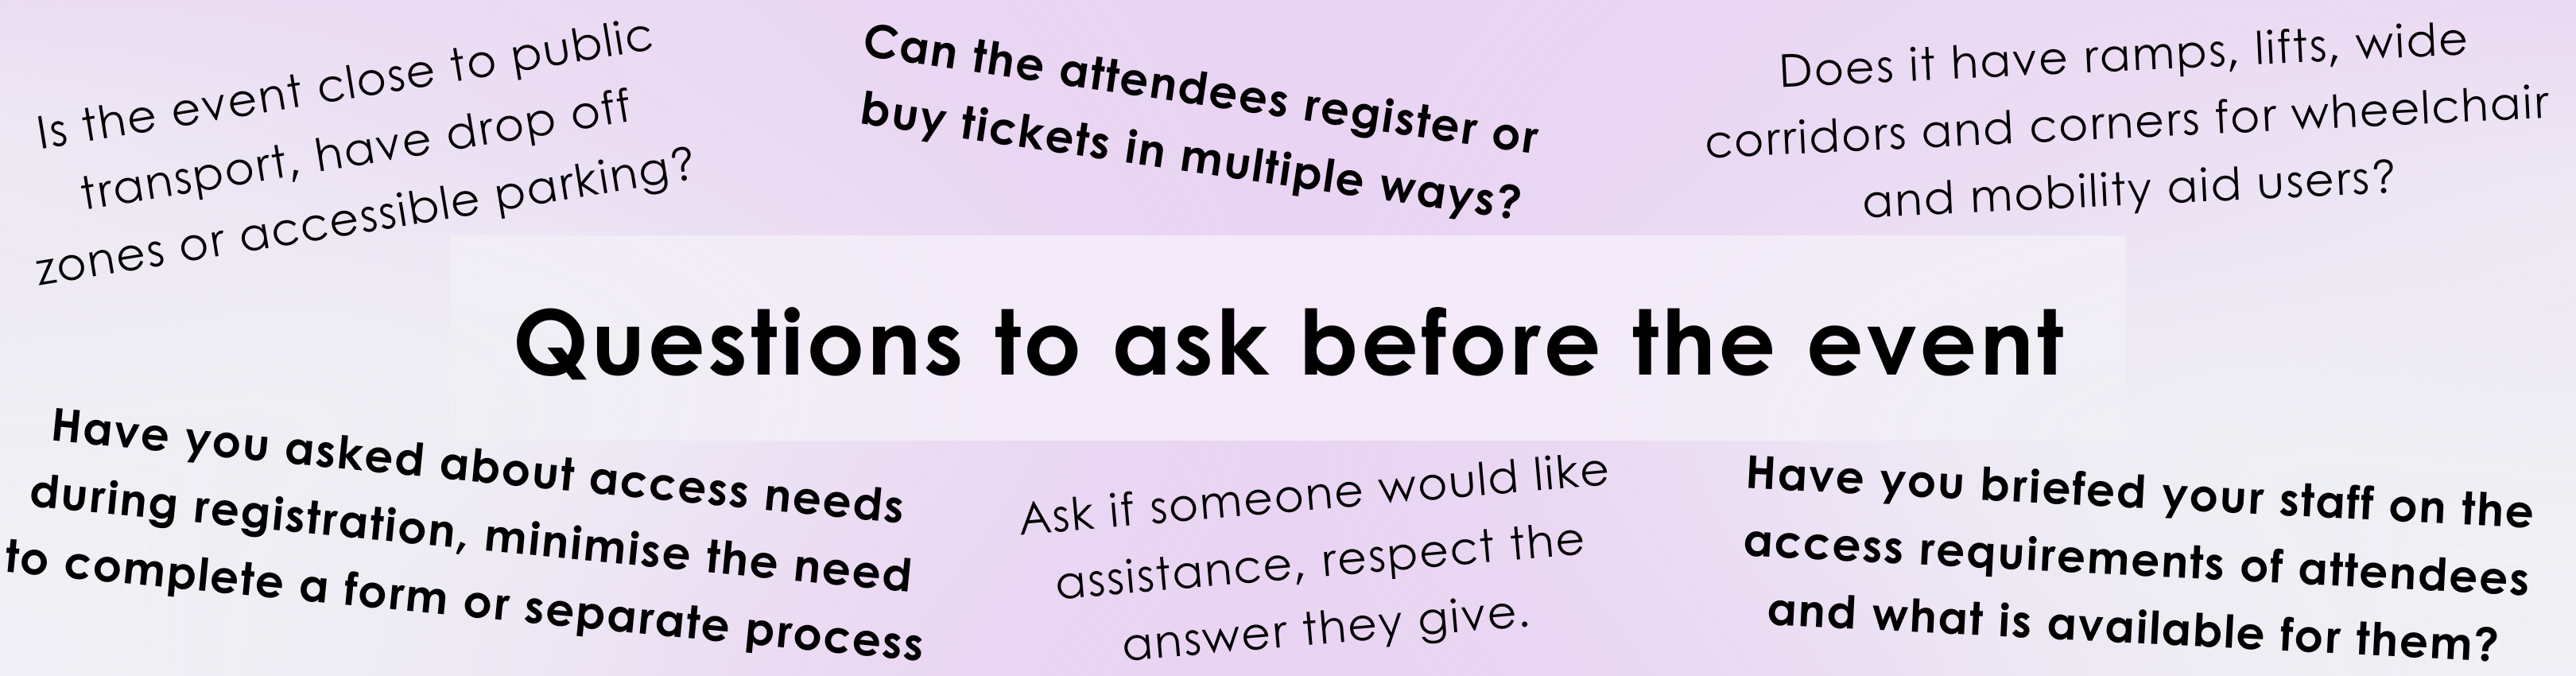 A light purple background with gradient white bottom corners. A transparent white box with text "questions to ask before the event", with 6 questions listed surrounding the heading, 3 in bold text and 3 in normal style font.